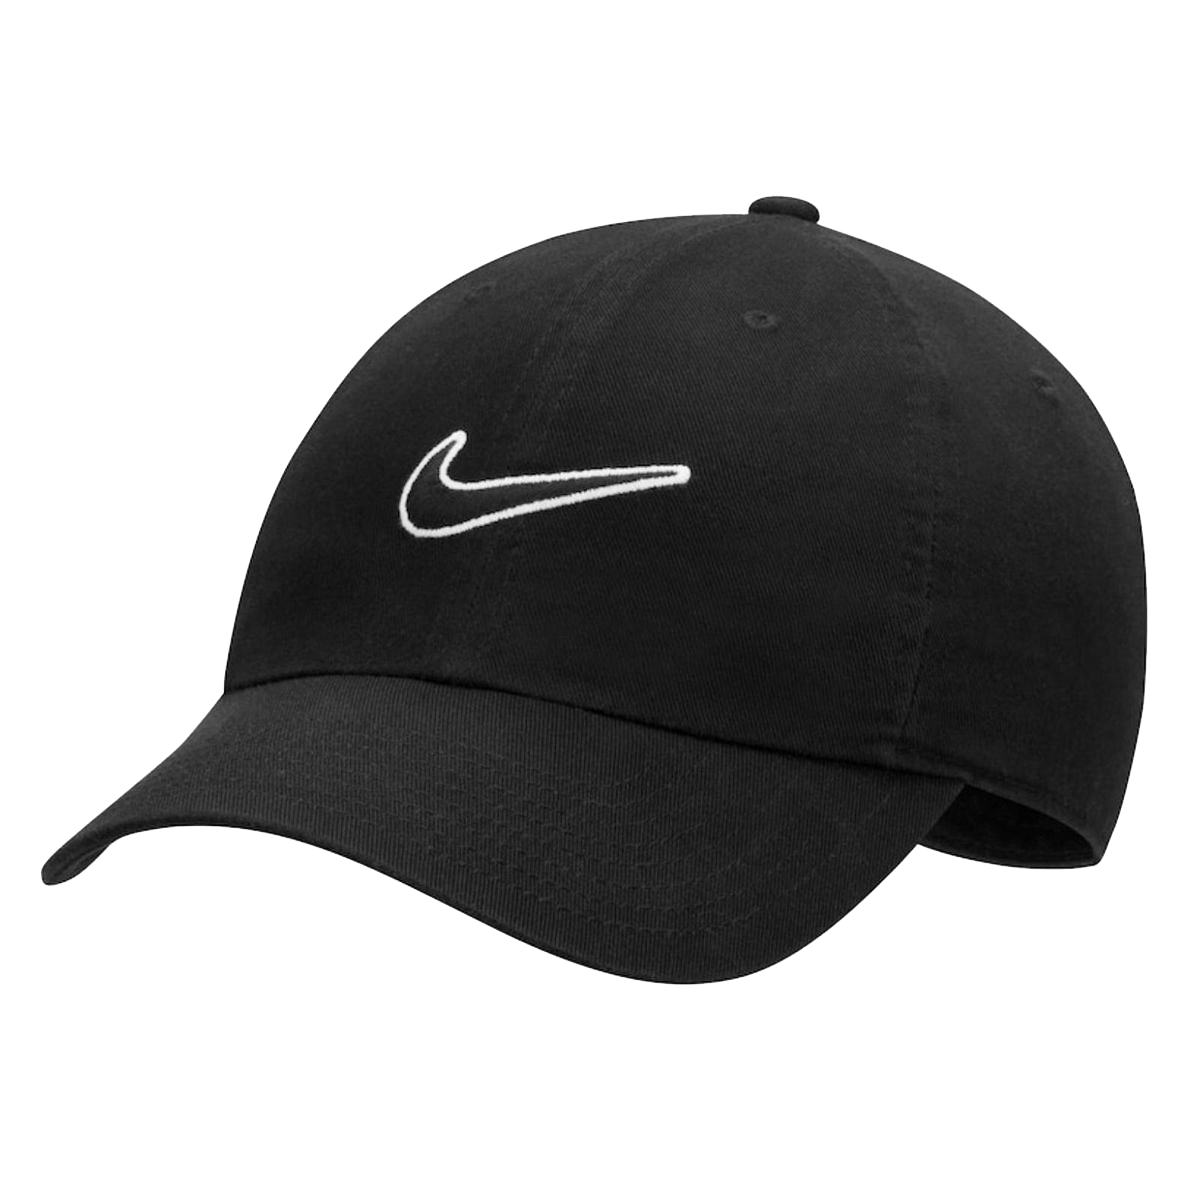 Nike Sportswear png images